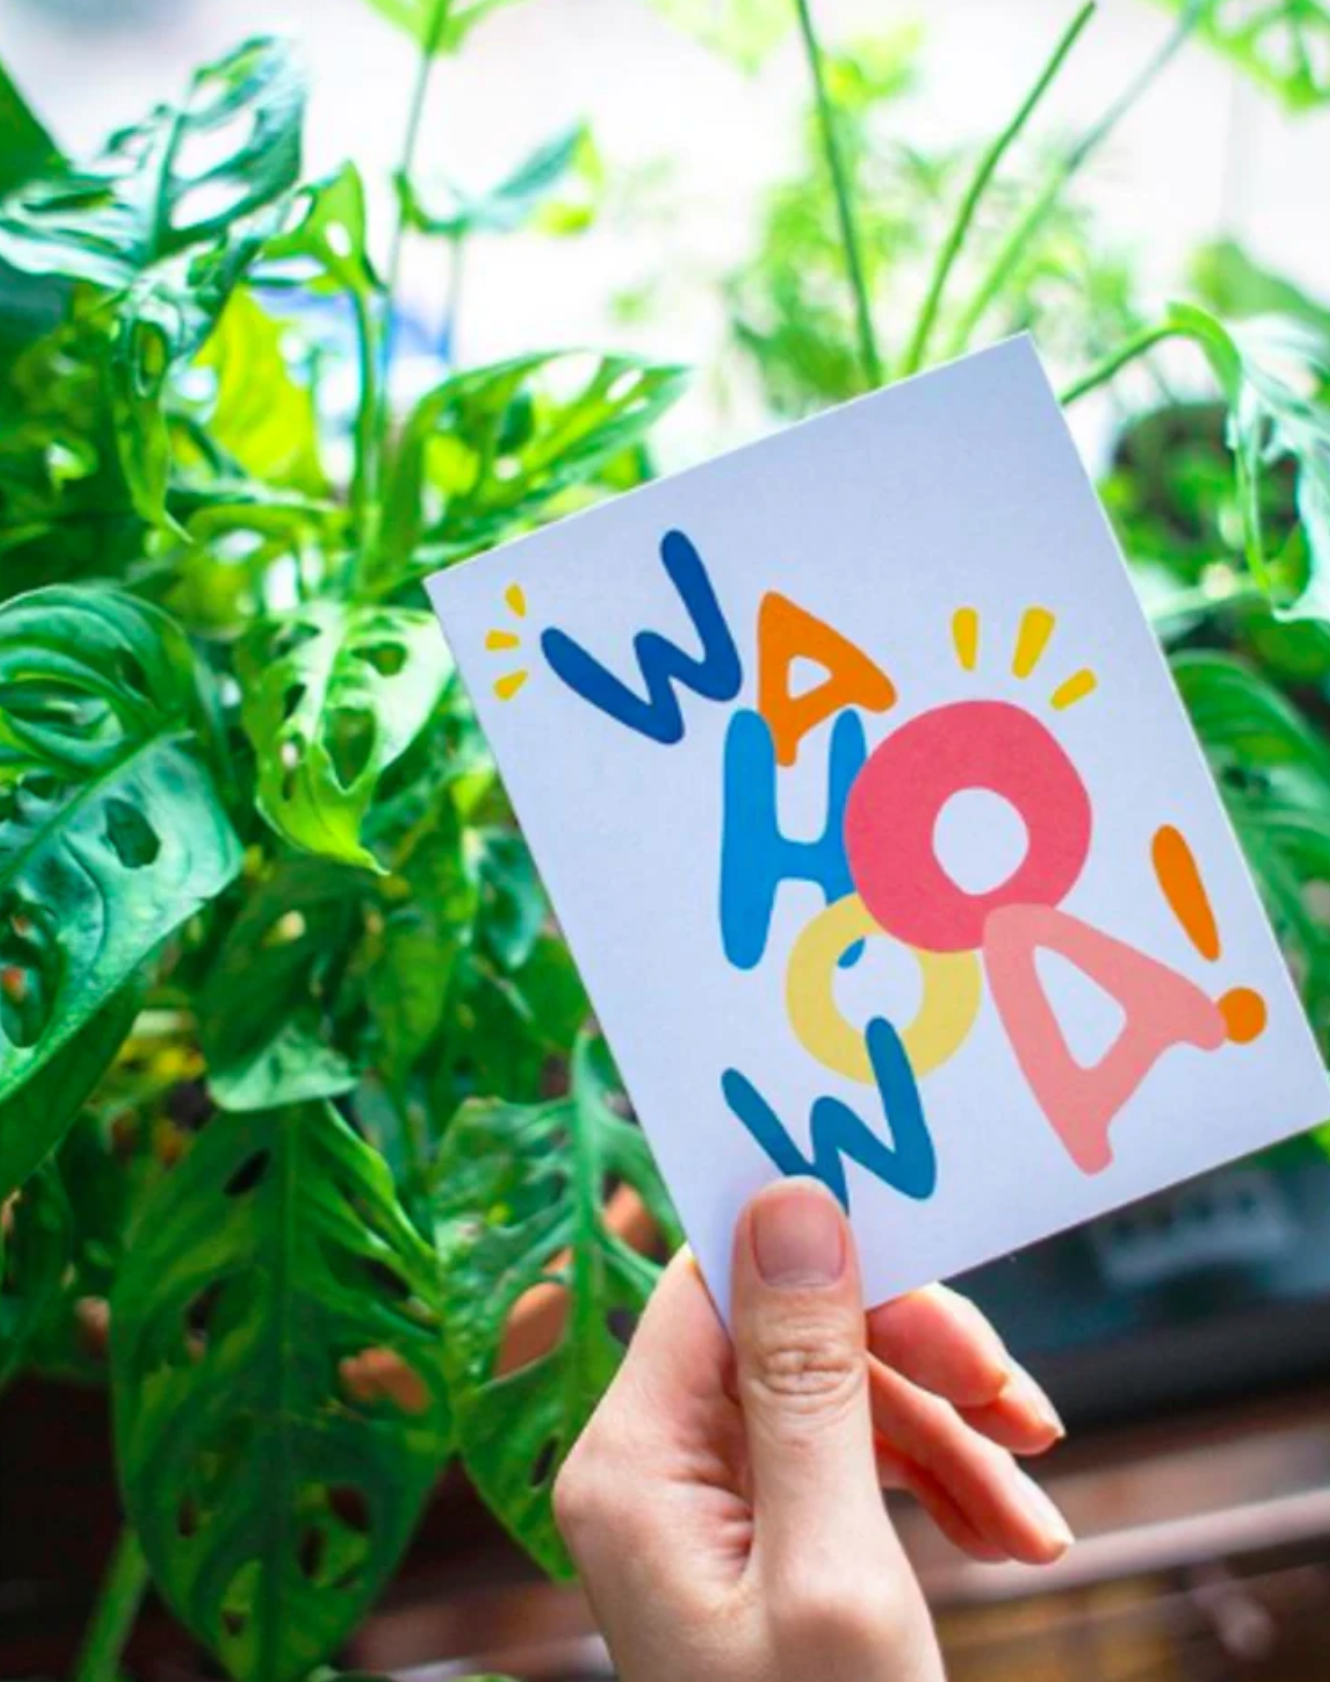 Colorful card that says "Wahoowa!" in whimsical lettering, made by Brittany Fan Art